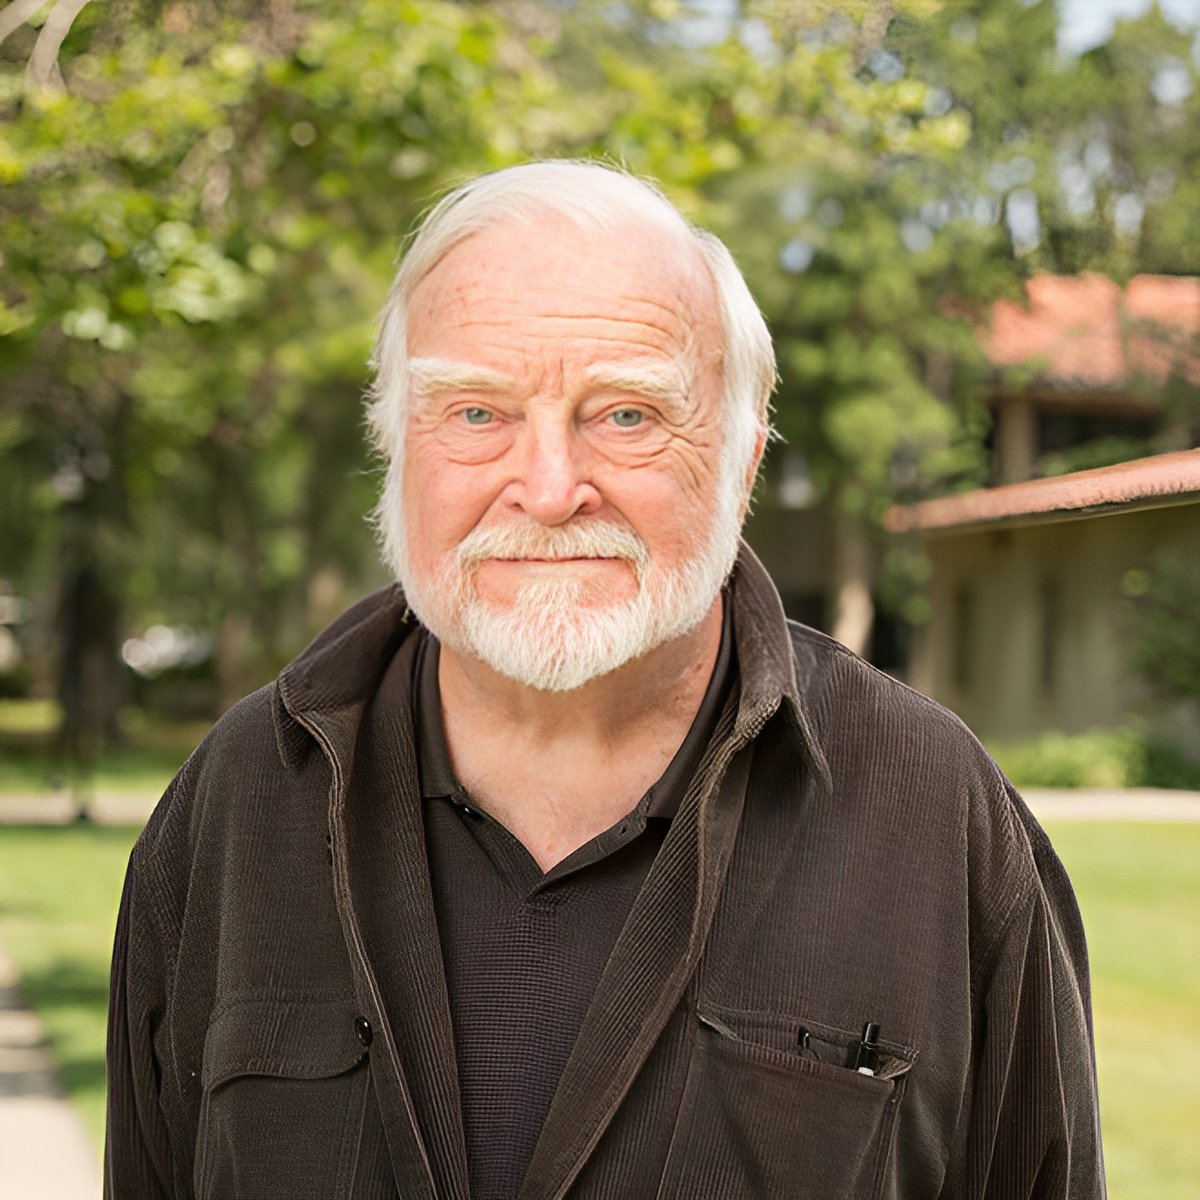 Let's all join in to wish a very happy birthday to the legendary psychologist Mihaly Csikszentmihalyi! Your work on flow, creativity #HappyBirthdayMihalyCsikszentmihalyi #PsychologyLegend #FlowStateMaster Read Bio:- thefamouspersonalities.com/profile/histor…